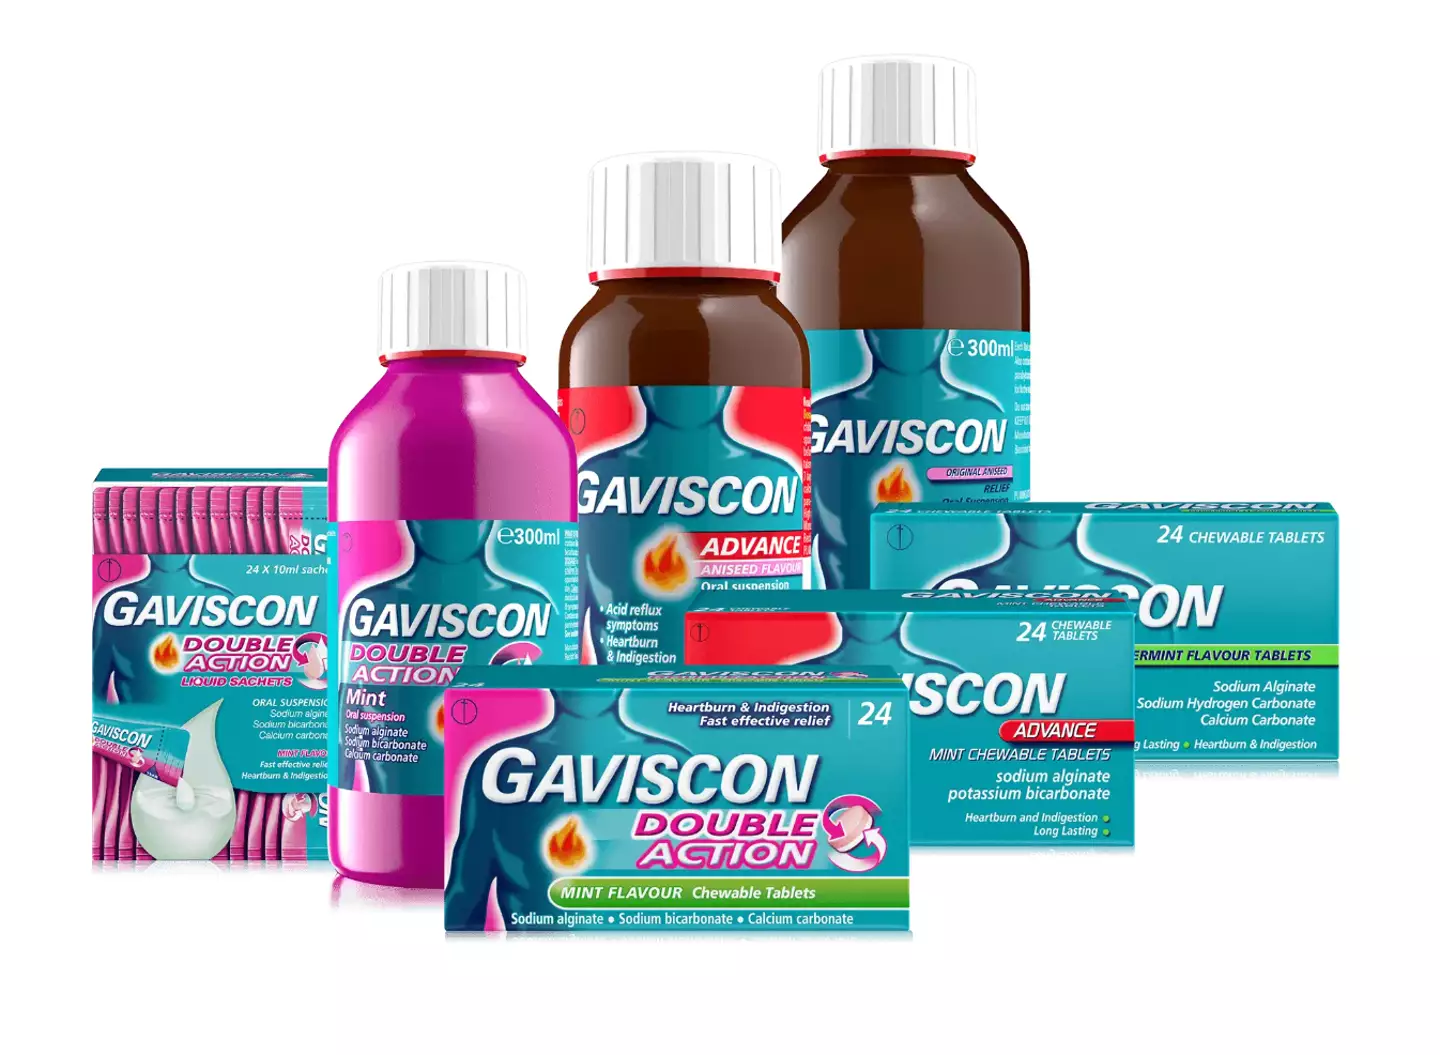 Gaviscon and other over-the-counter medications might be difficult to get as well.